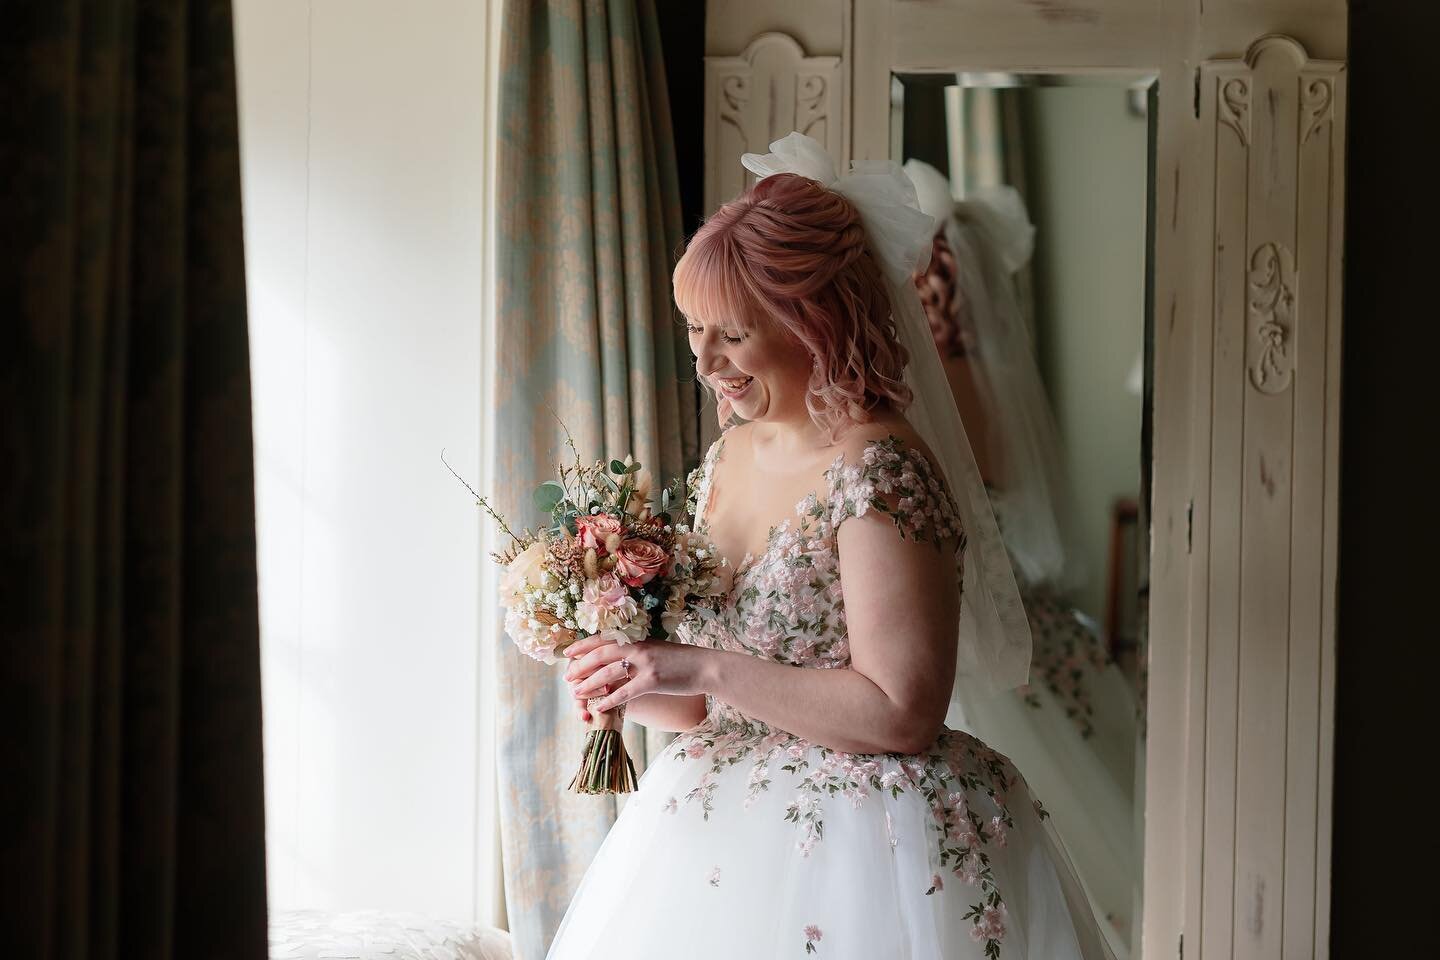 ✨ I n  F u l l  B l o o m ✨

We are preparing for our first wedding of the year taking place on Monday, so thought it timely to look back on the same from 2022.

Leah bloomed in her unique floral embroidered gown as she prepared for her elopement to 